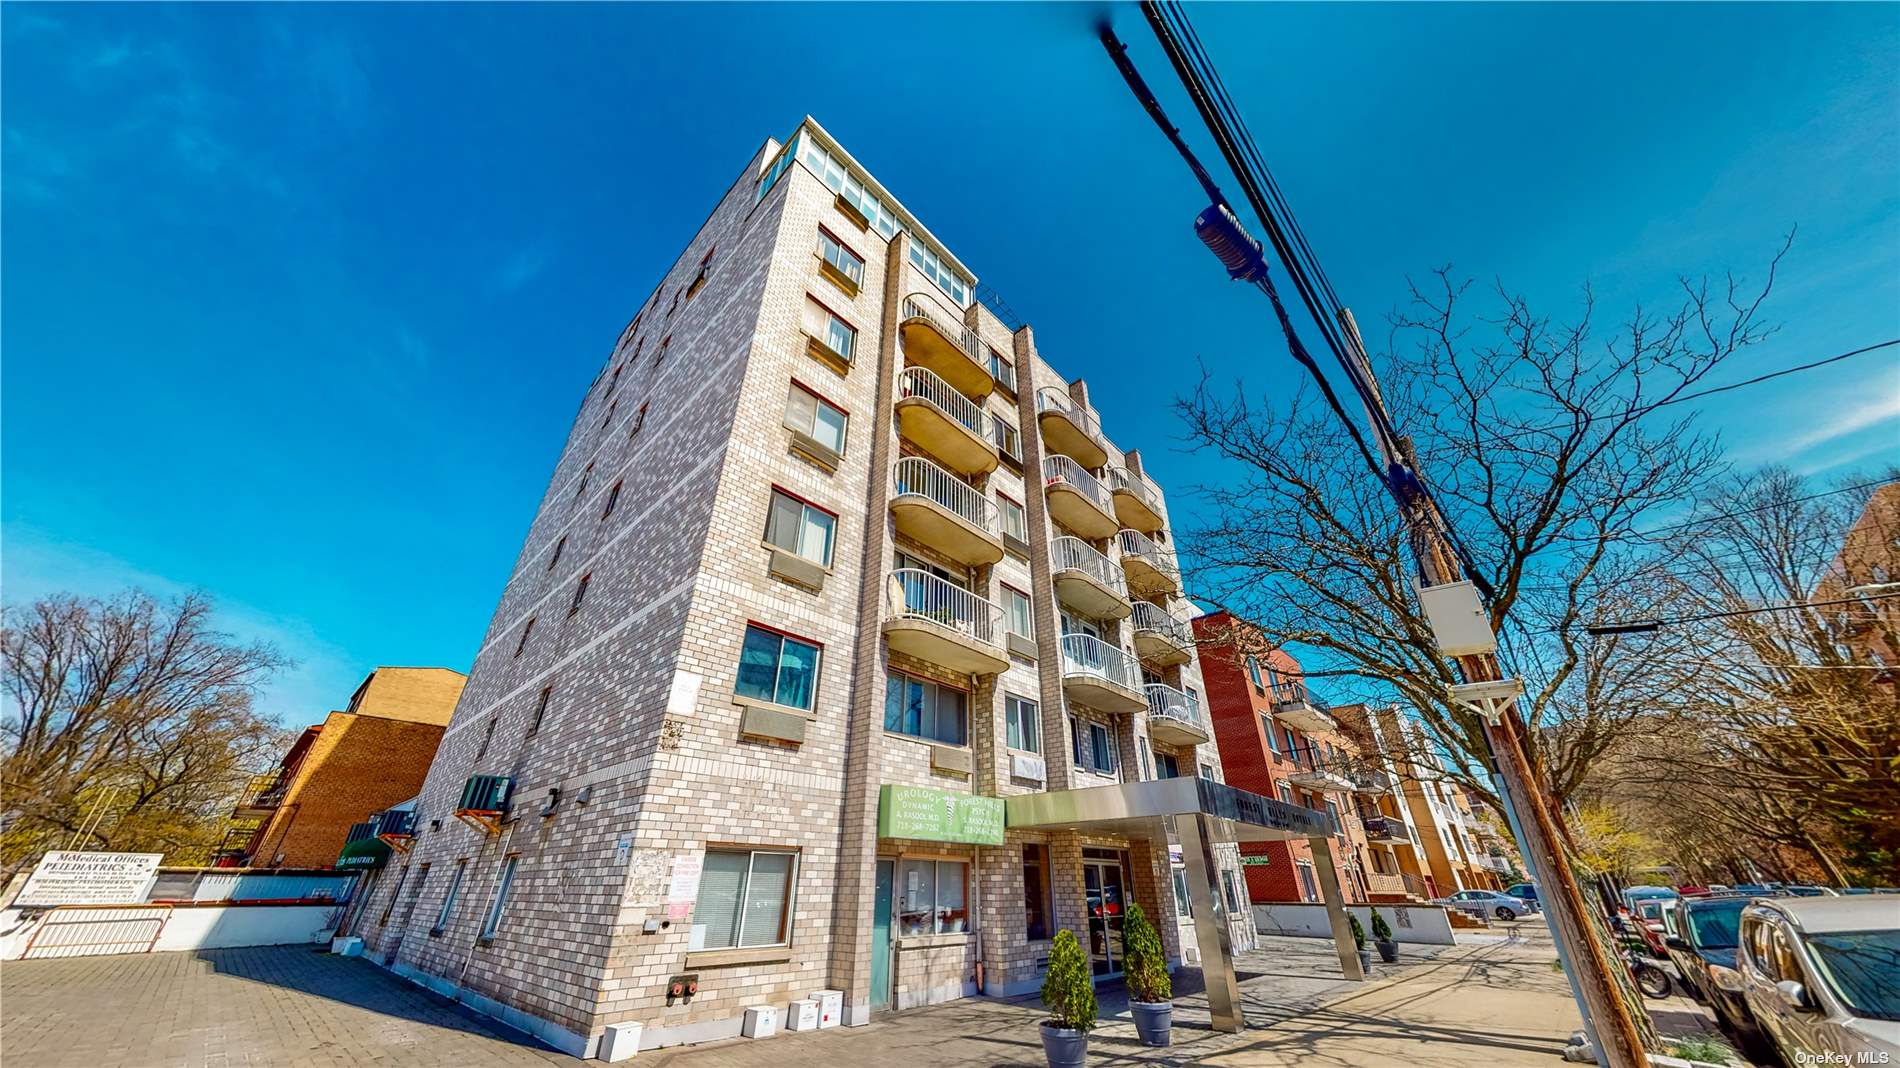 Condo in Forest Hills - 113th St  Queens, NY 11375